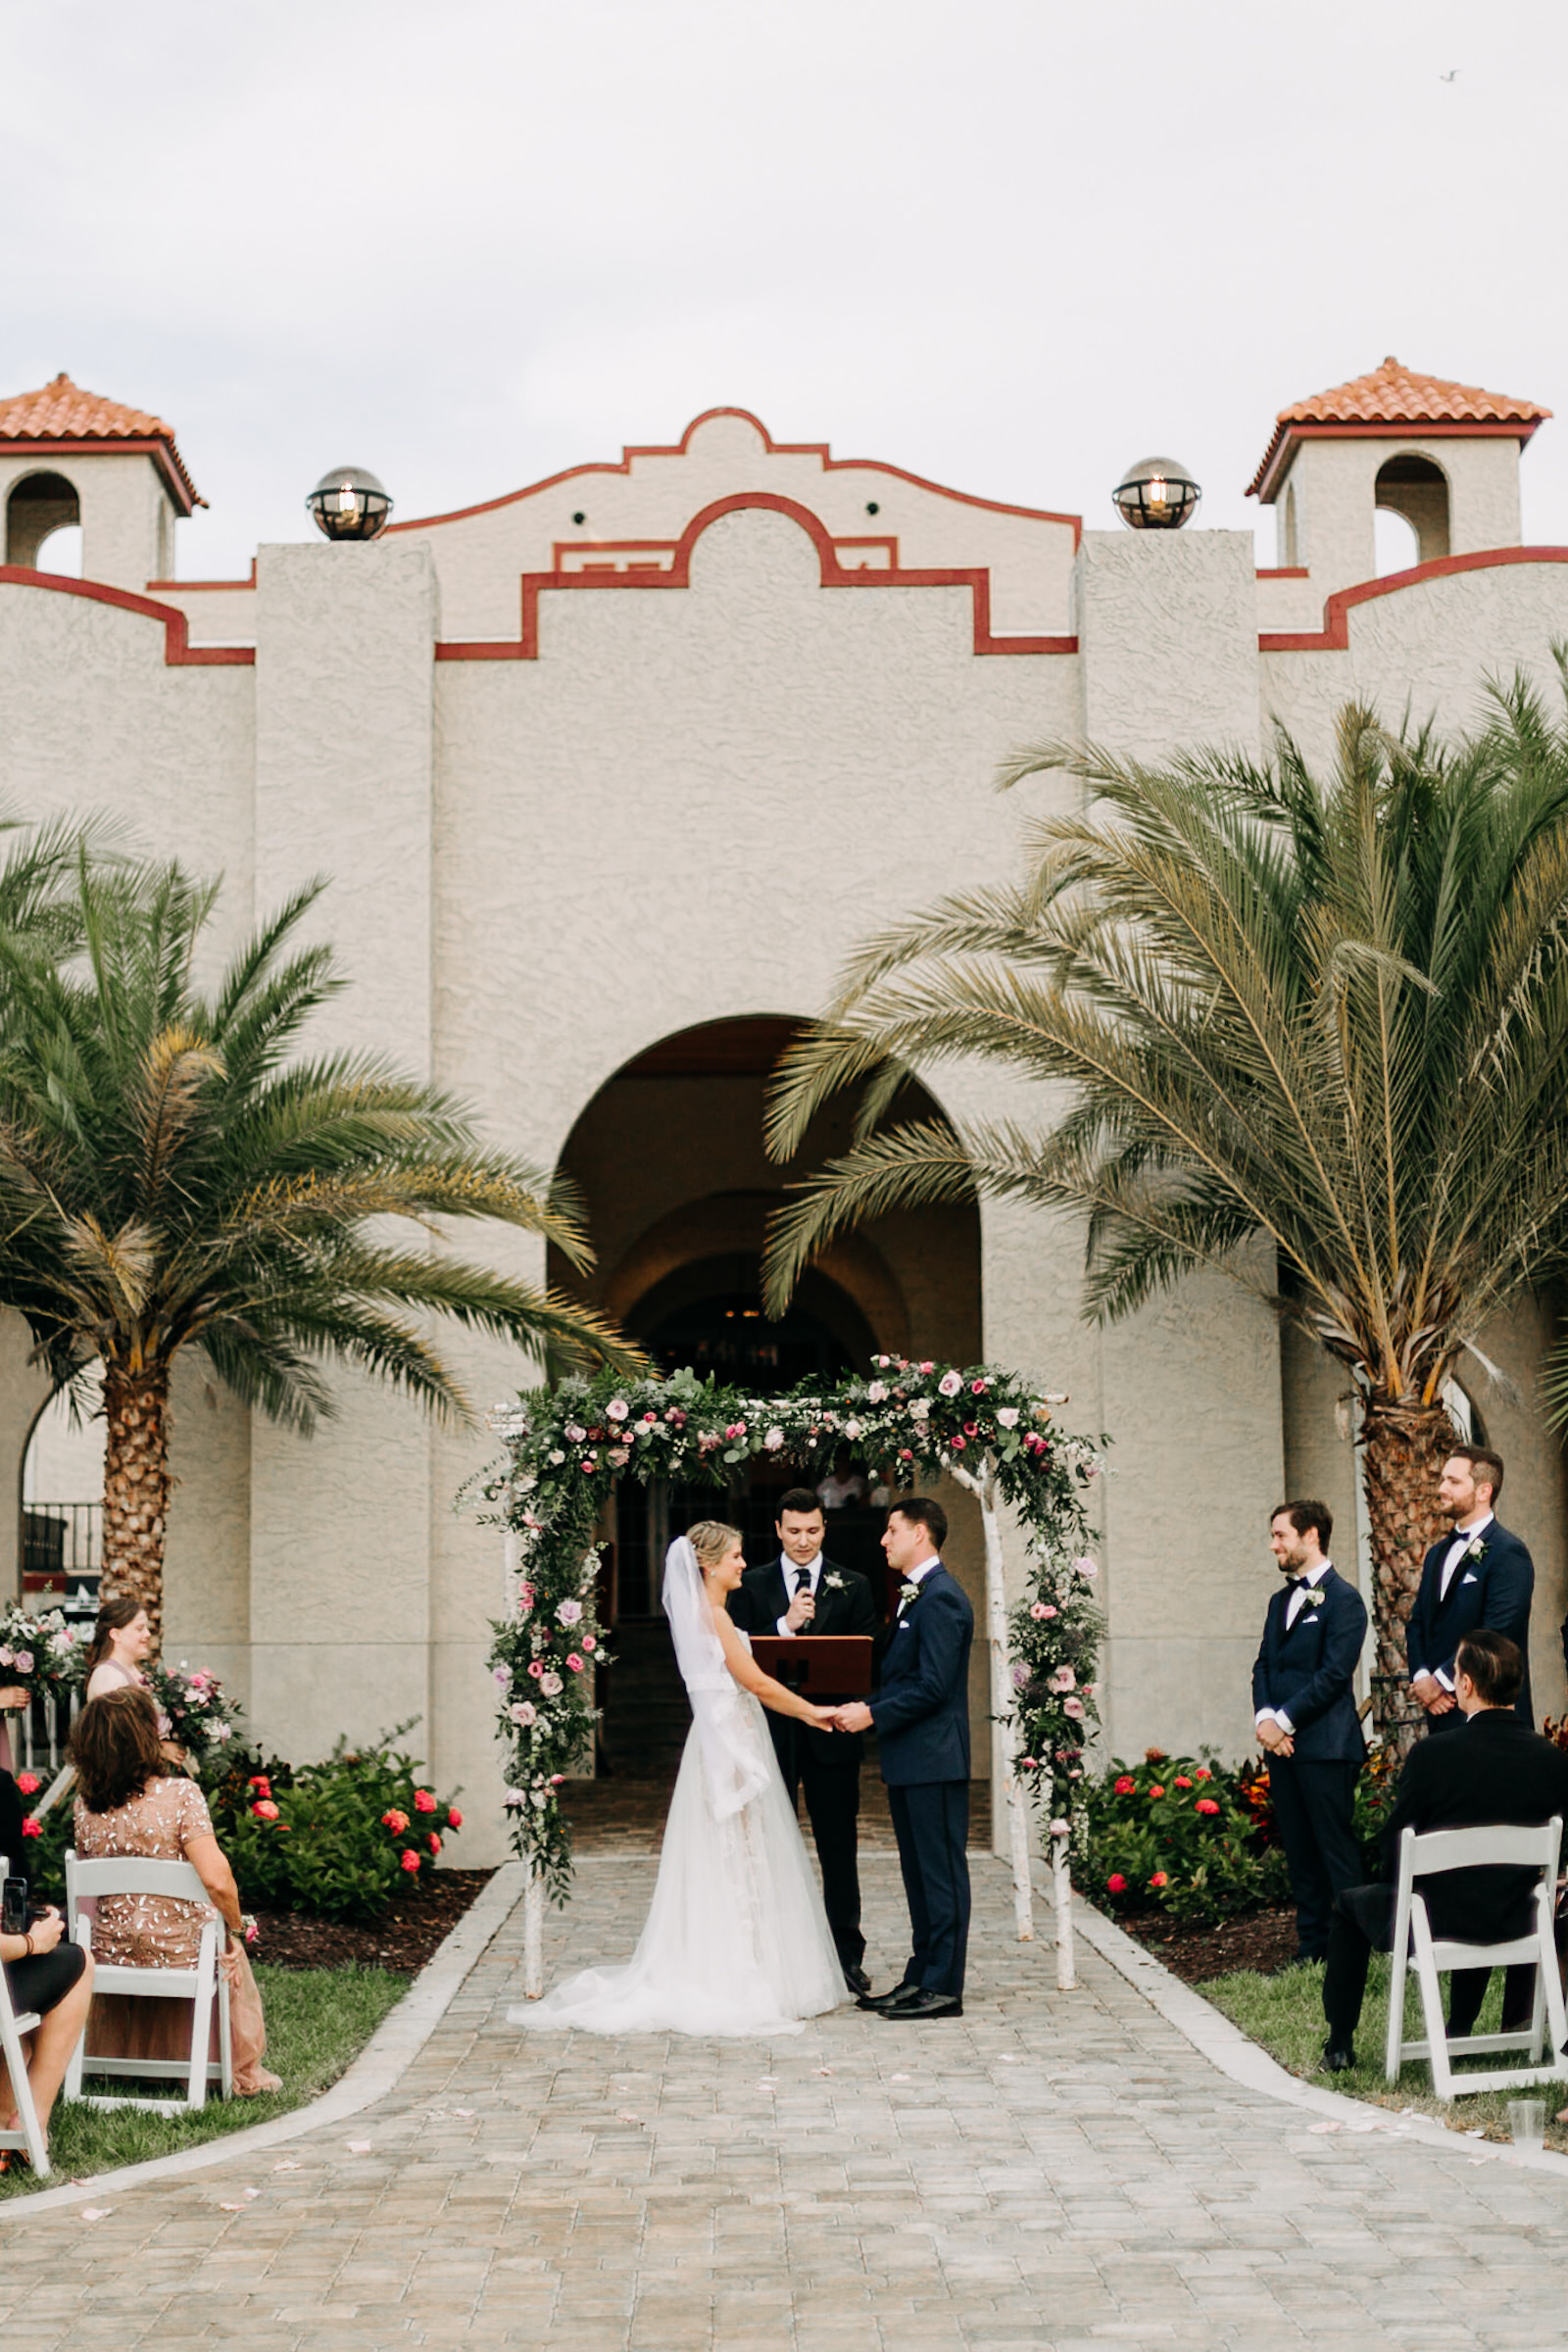 Florida Bride and Groom Exchanging Wedding Vows During Ceremony at Dunedin Wedding Venue The Fenway Hotel | Tampa Bay Wedding Photographer Amber McWhorter Photography